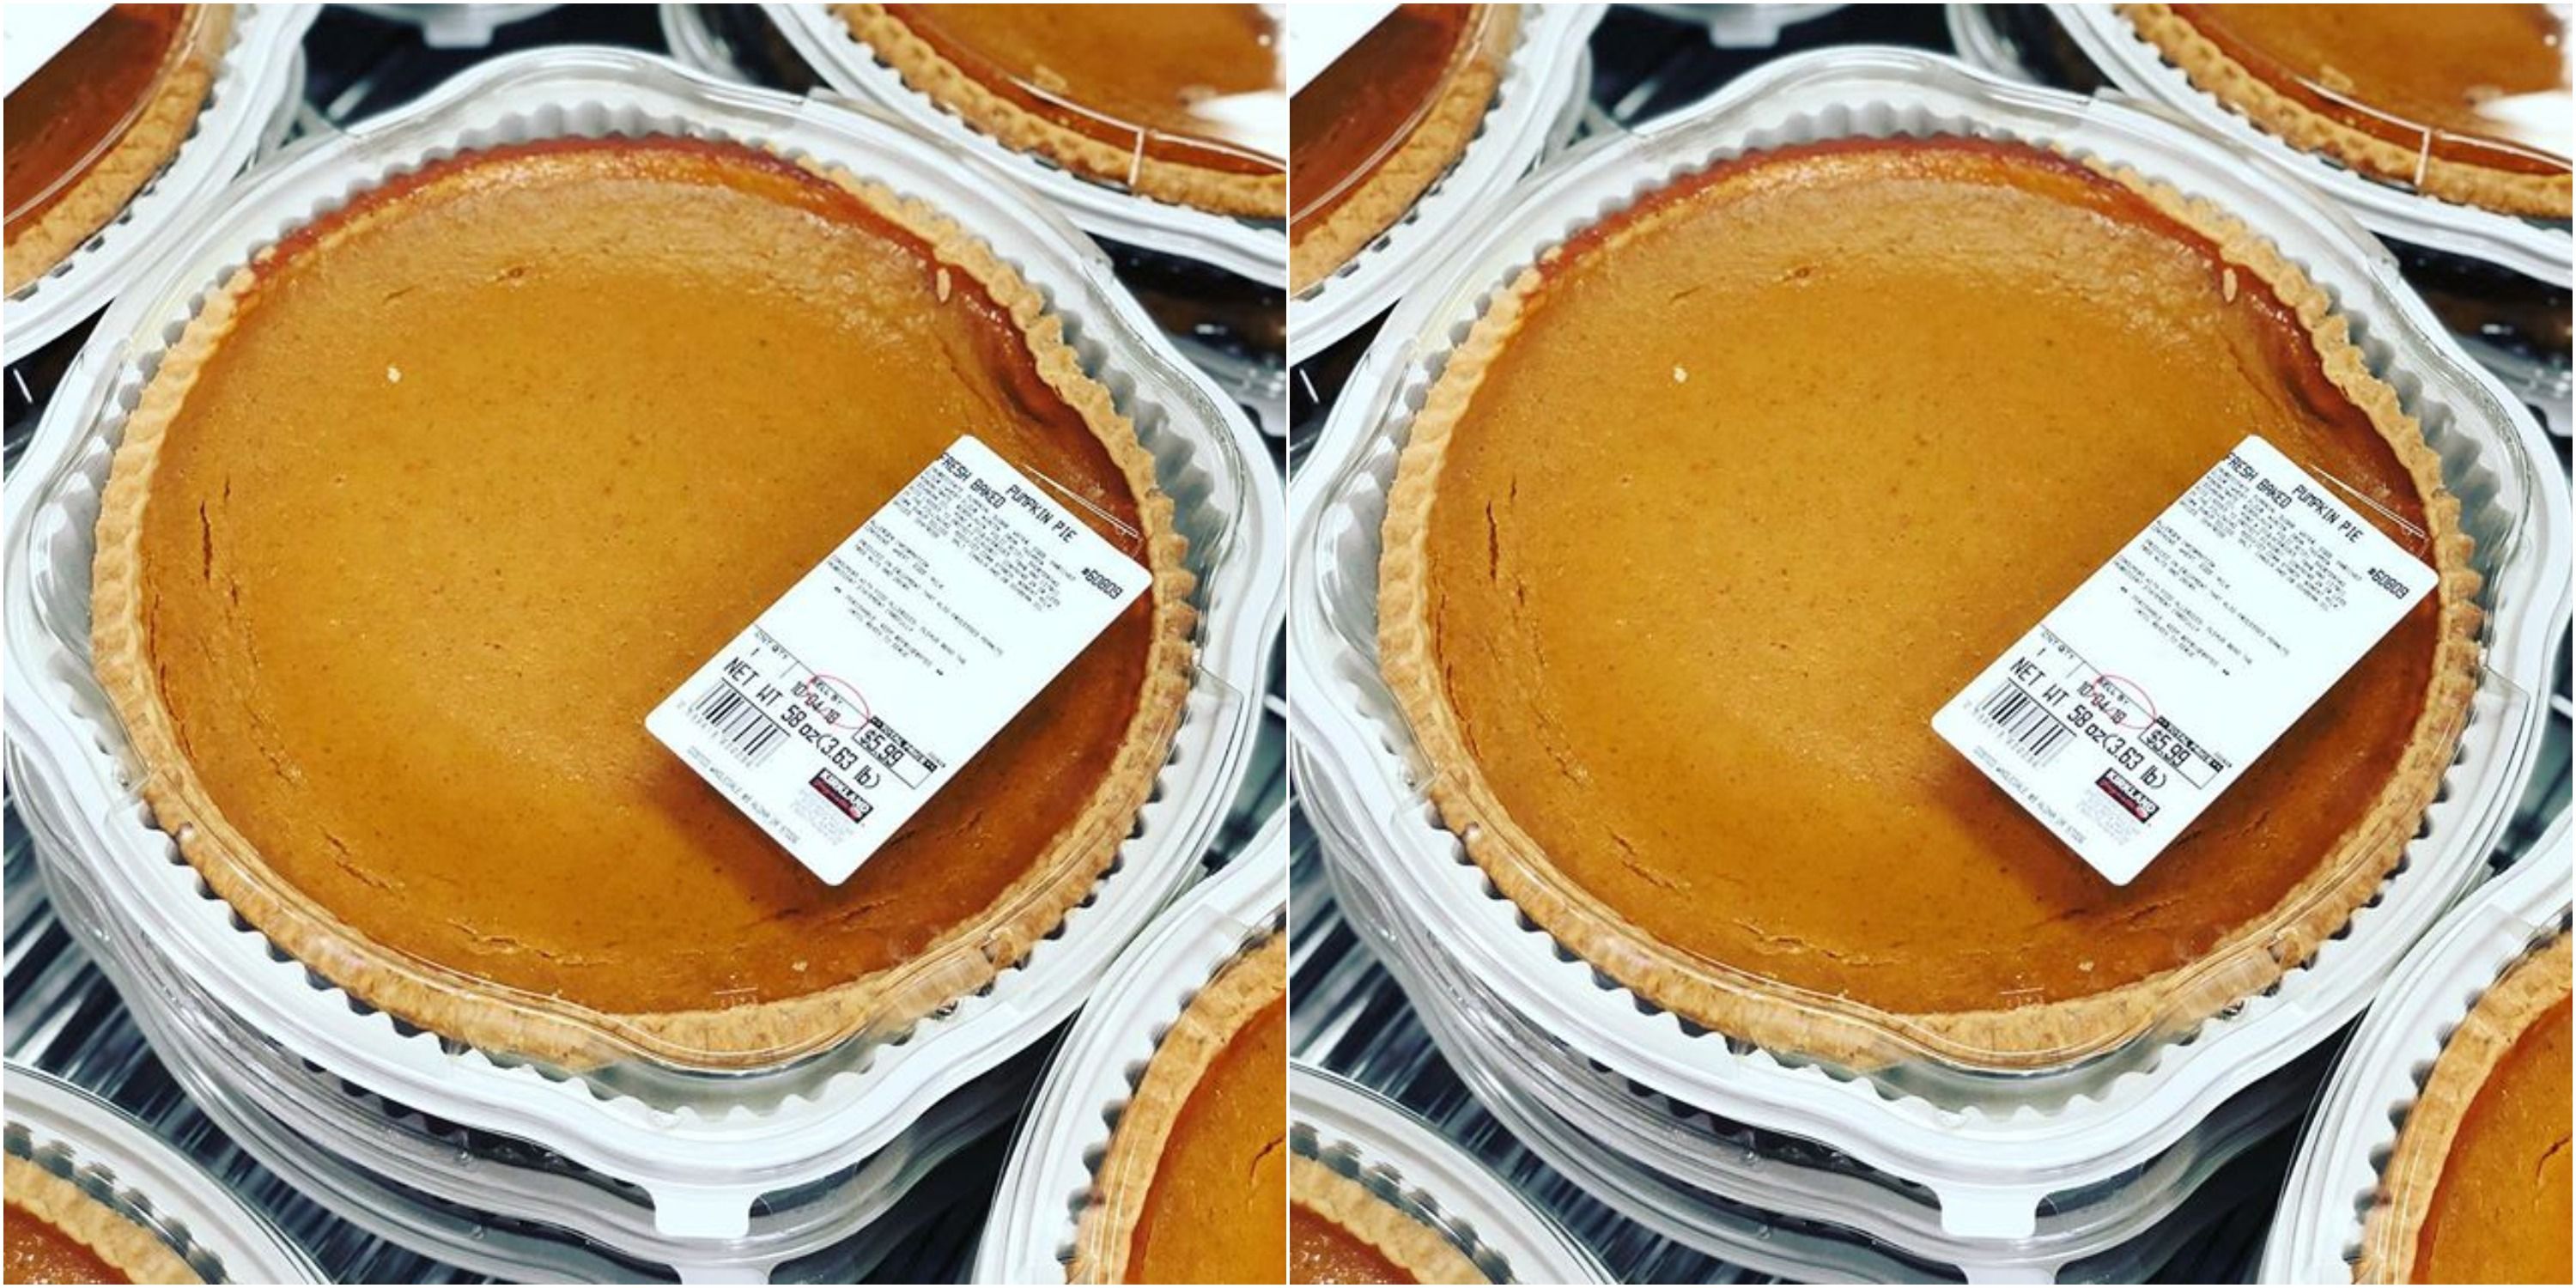 Costco Pumpkin Pie  : Go Ahead And Sign Yourself Up For Thanksgiving Dessert Duty, Because Costco Is Selling A Whopper Of A Pumpkin Pie.